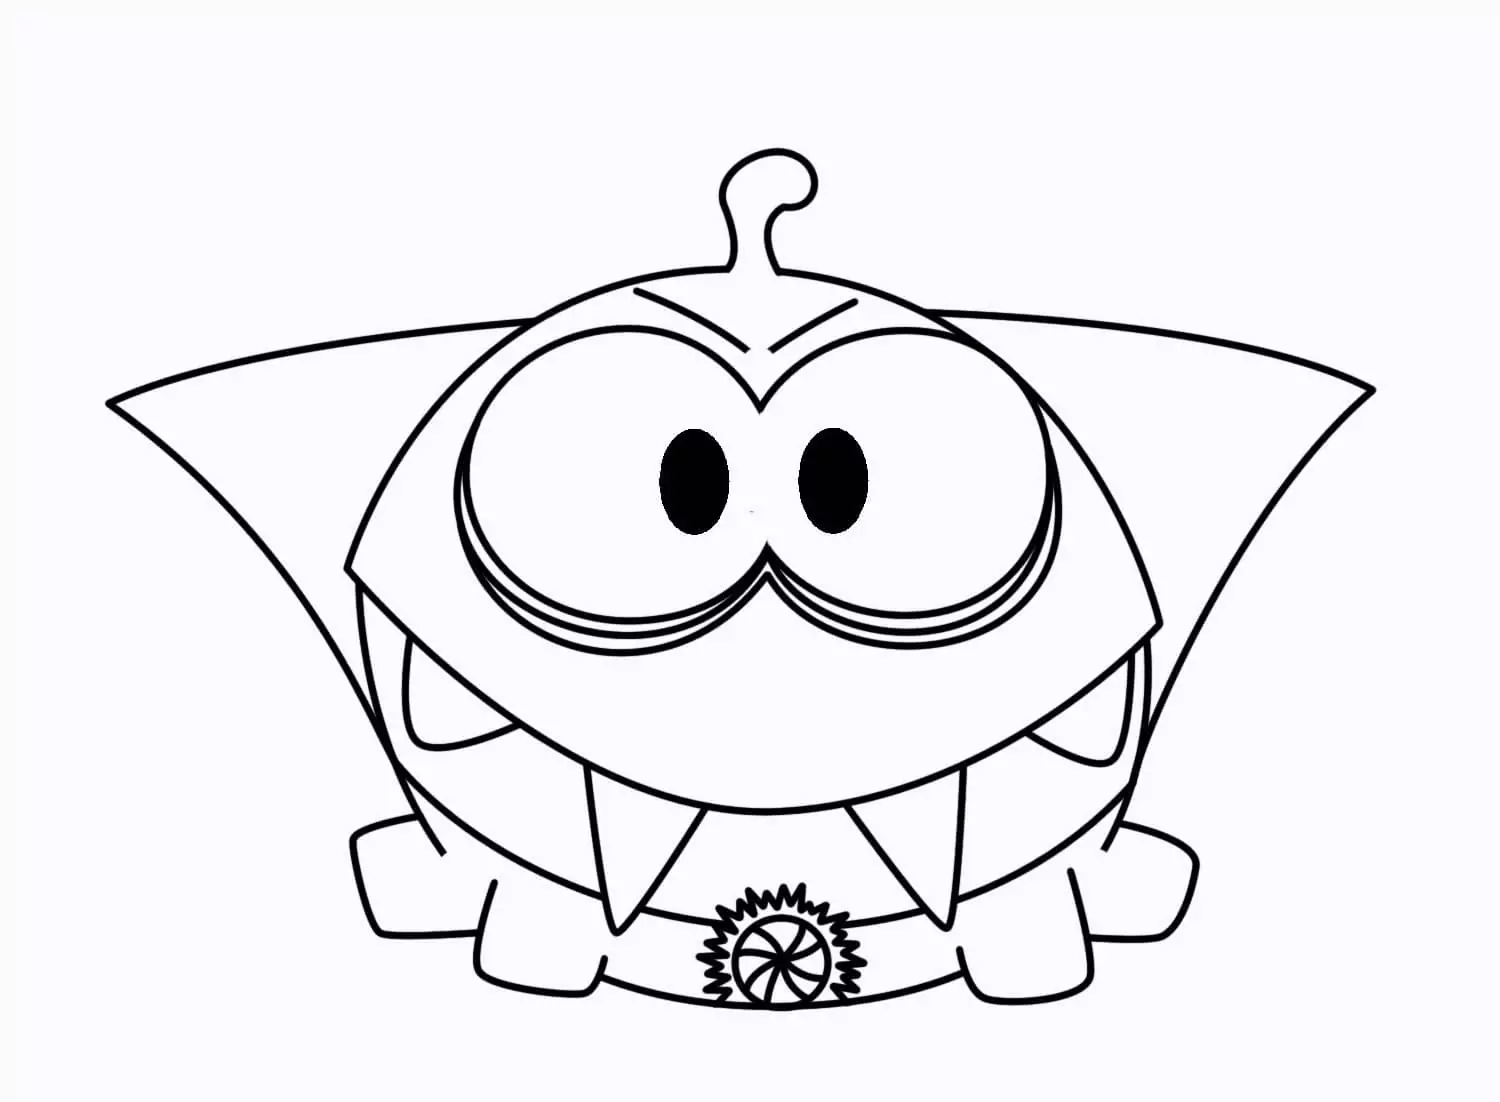 Om Nom 8 Coloring Page - Free Printable Coloring Pages for Kids